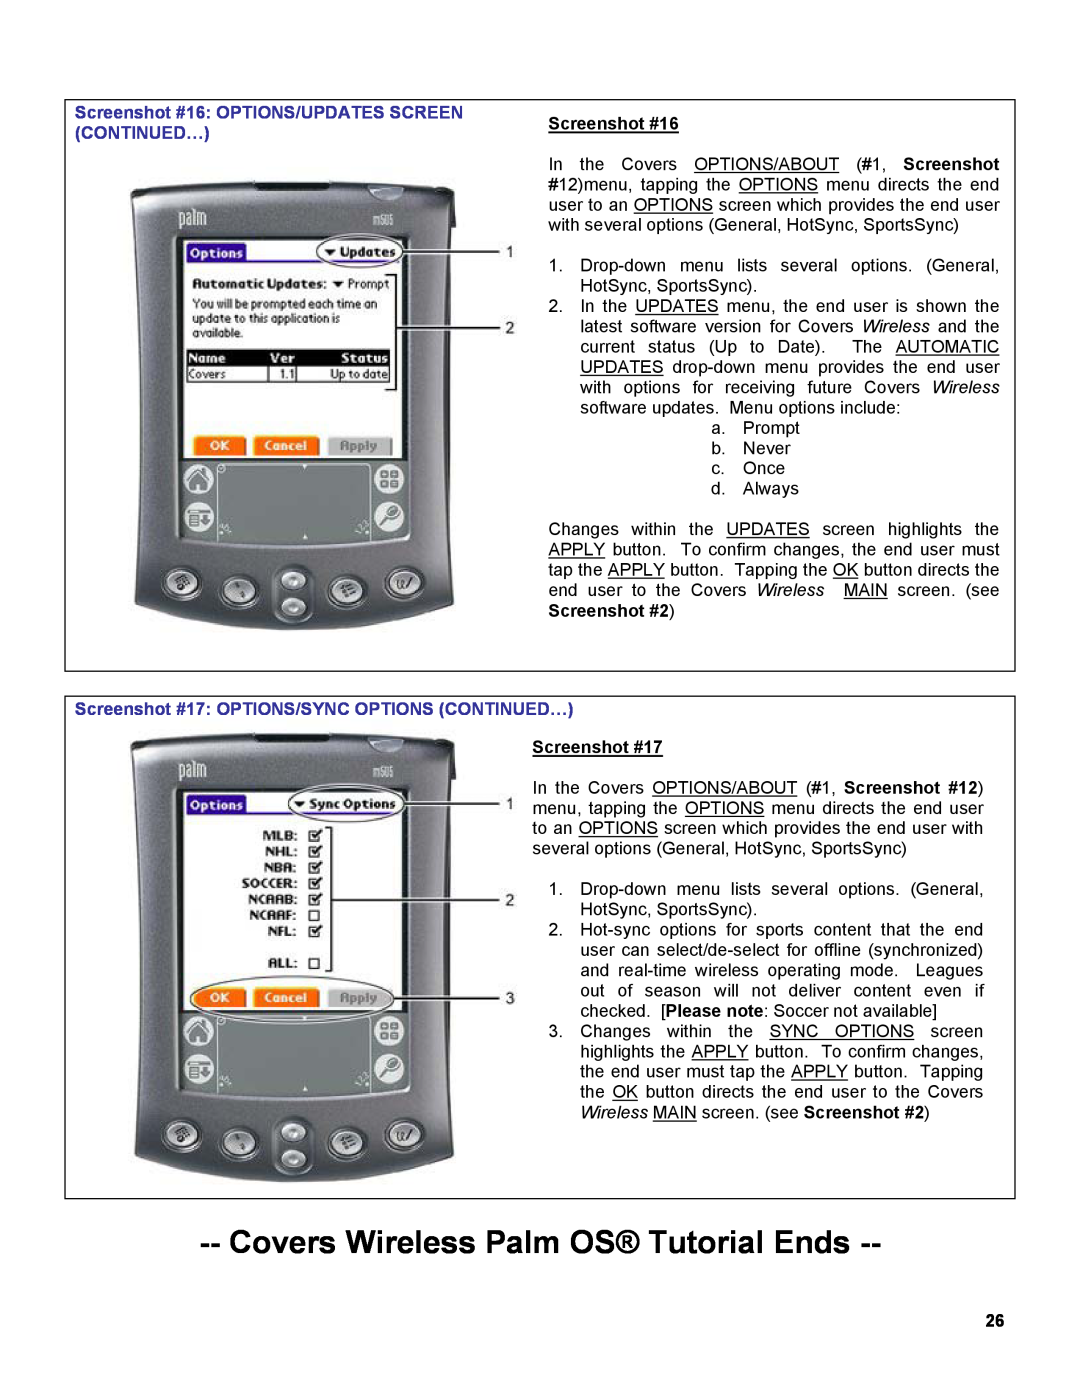 Palm OS Devices Covers Wireless Palm OS Tutorial Ends, Screenshot #16 OPTIONS/UPDATES SCREEN, Continued…, Screenshot #17 